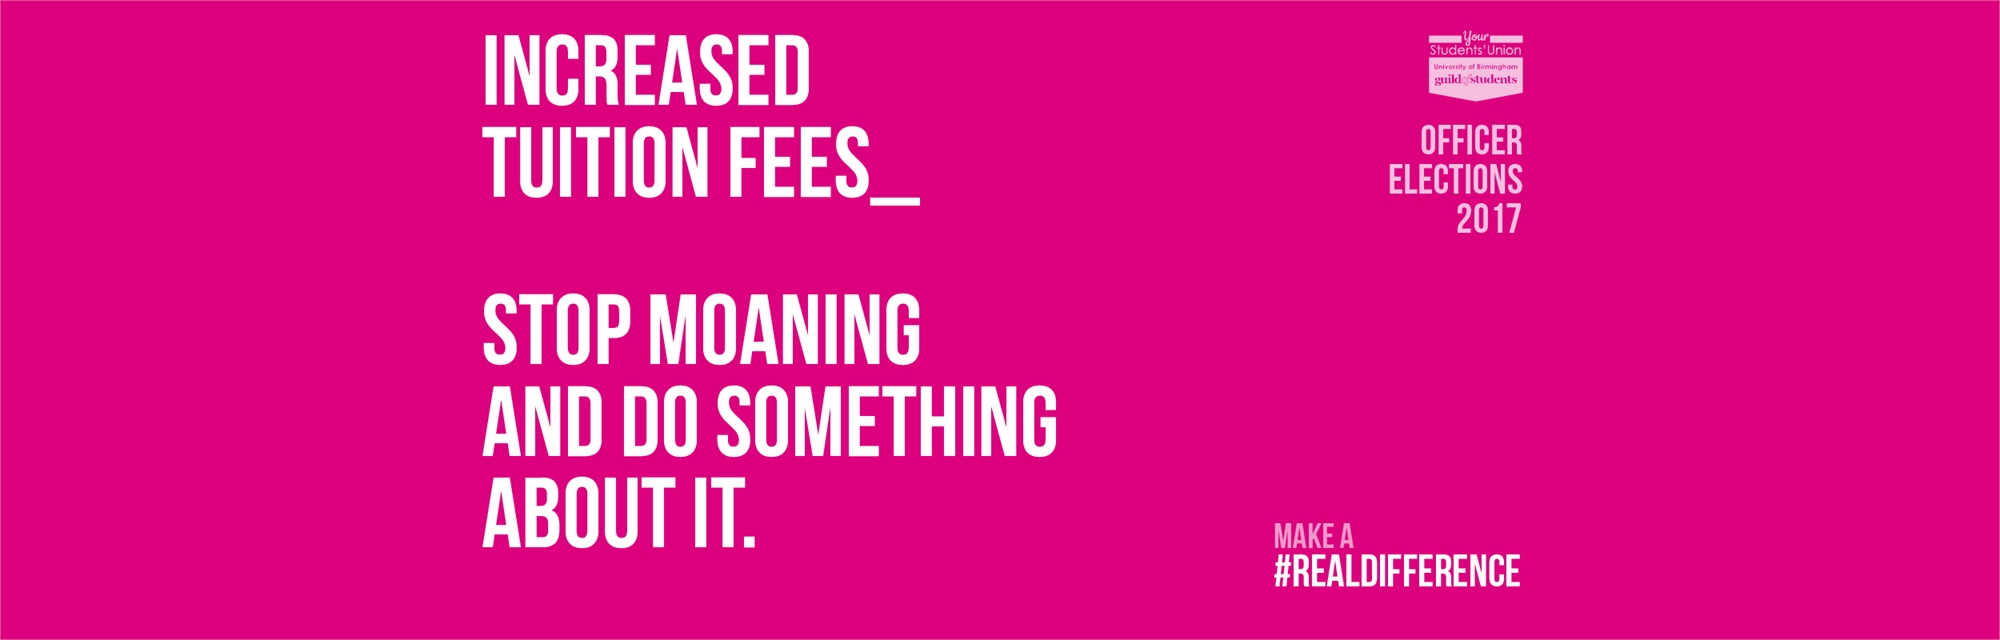 increased tuition fees - stop moaning about it - do something about it